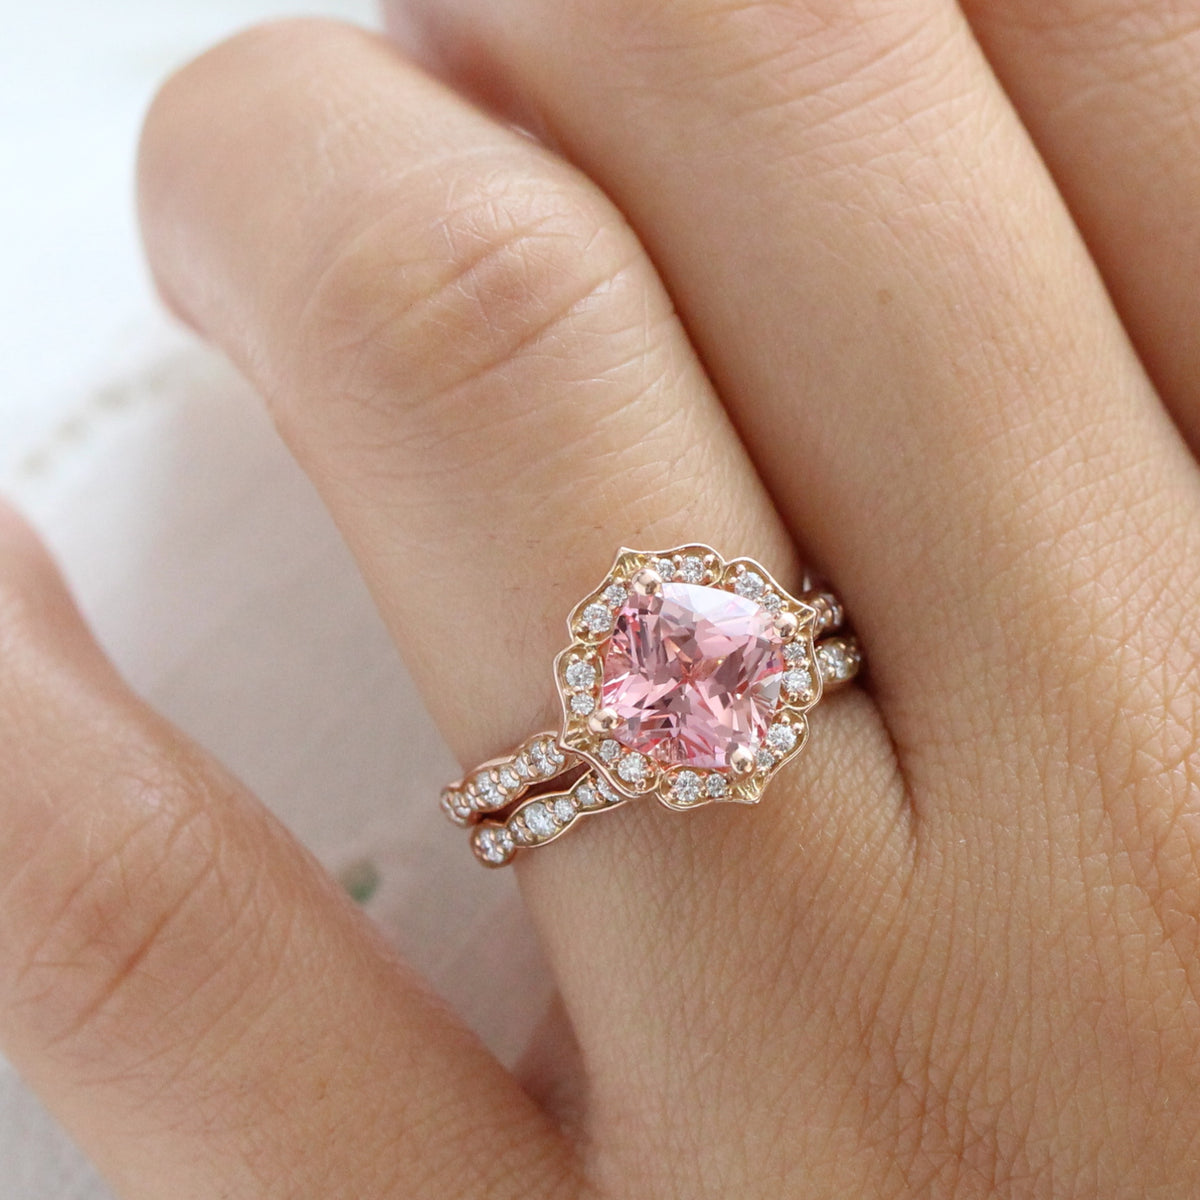 Large peach pink sapphire ring stack rose gold vintage halo diamond sapphire ring la more design jewelry